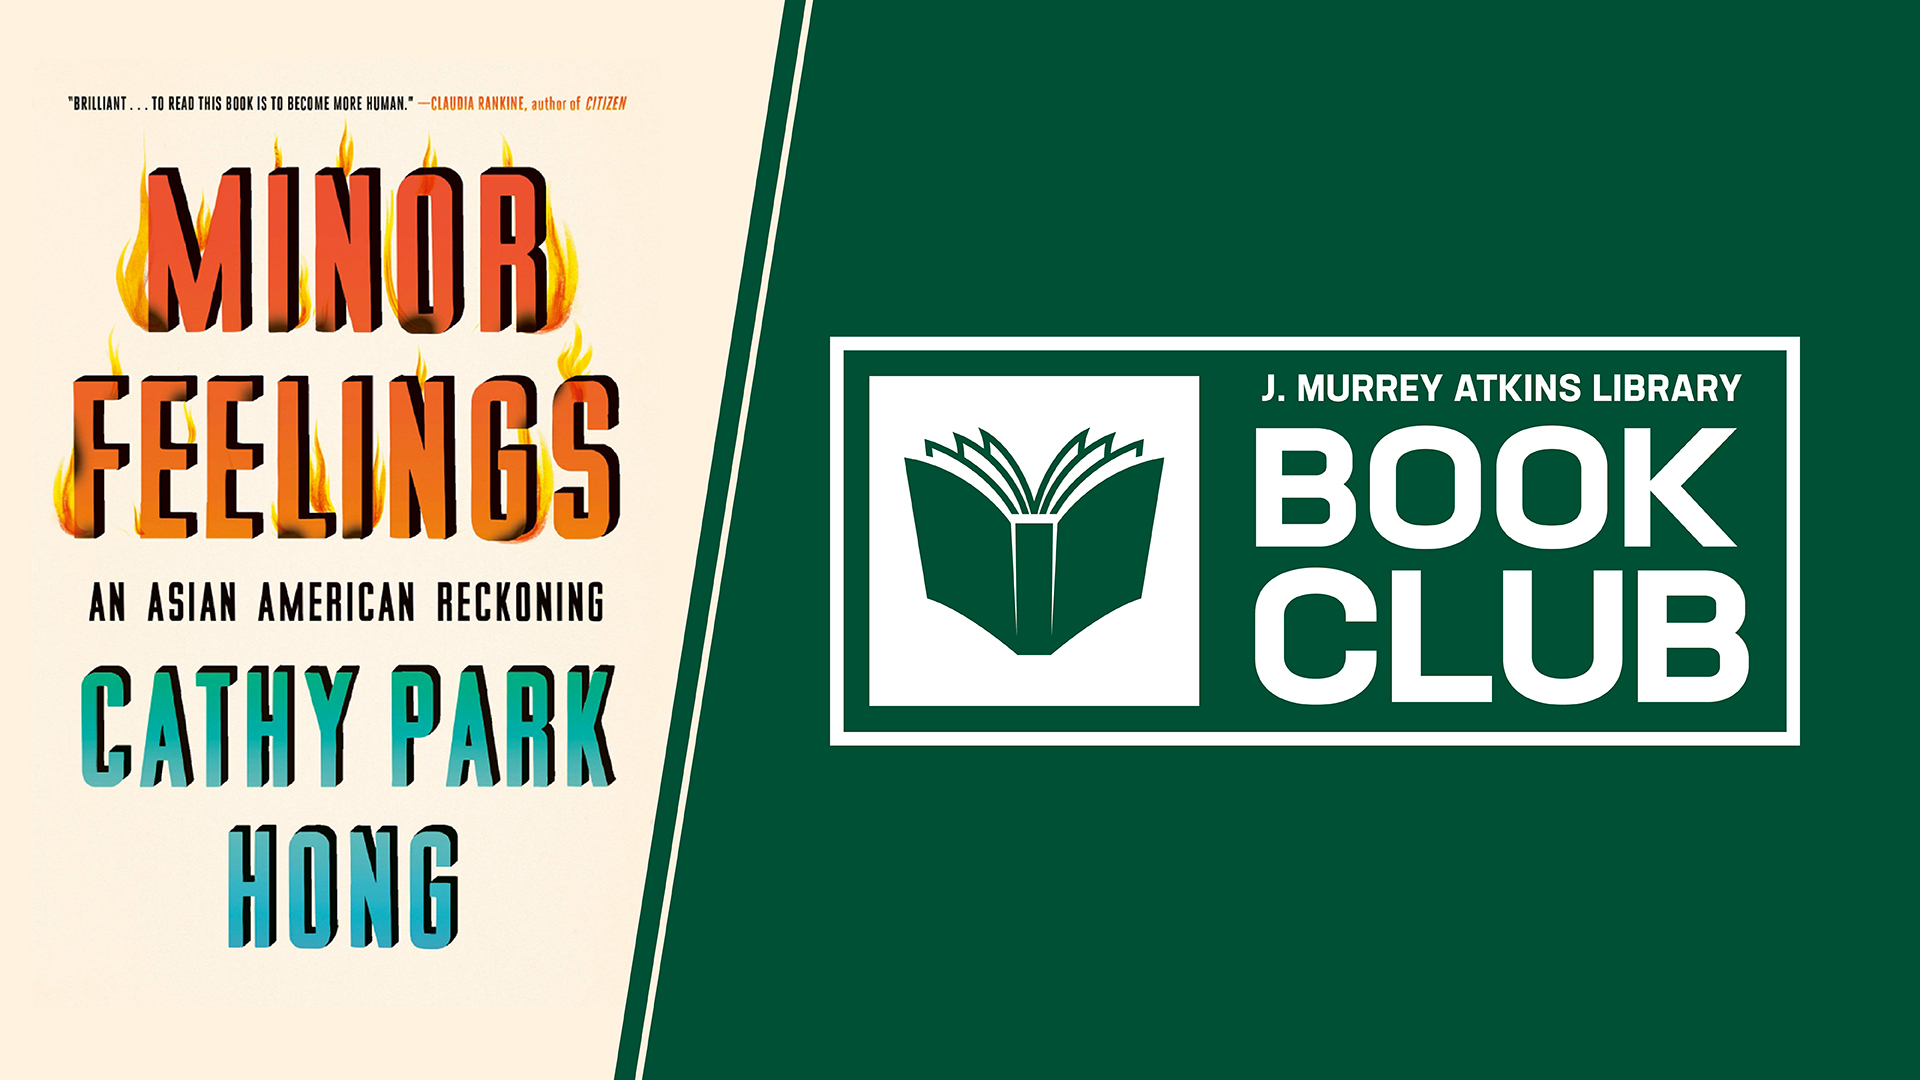 Atkins Book Club: Minor Feelings, and Asian American Reckoning by Cathy Park Hong